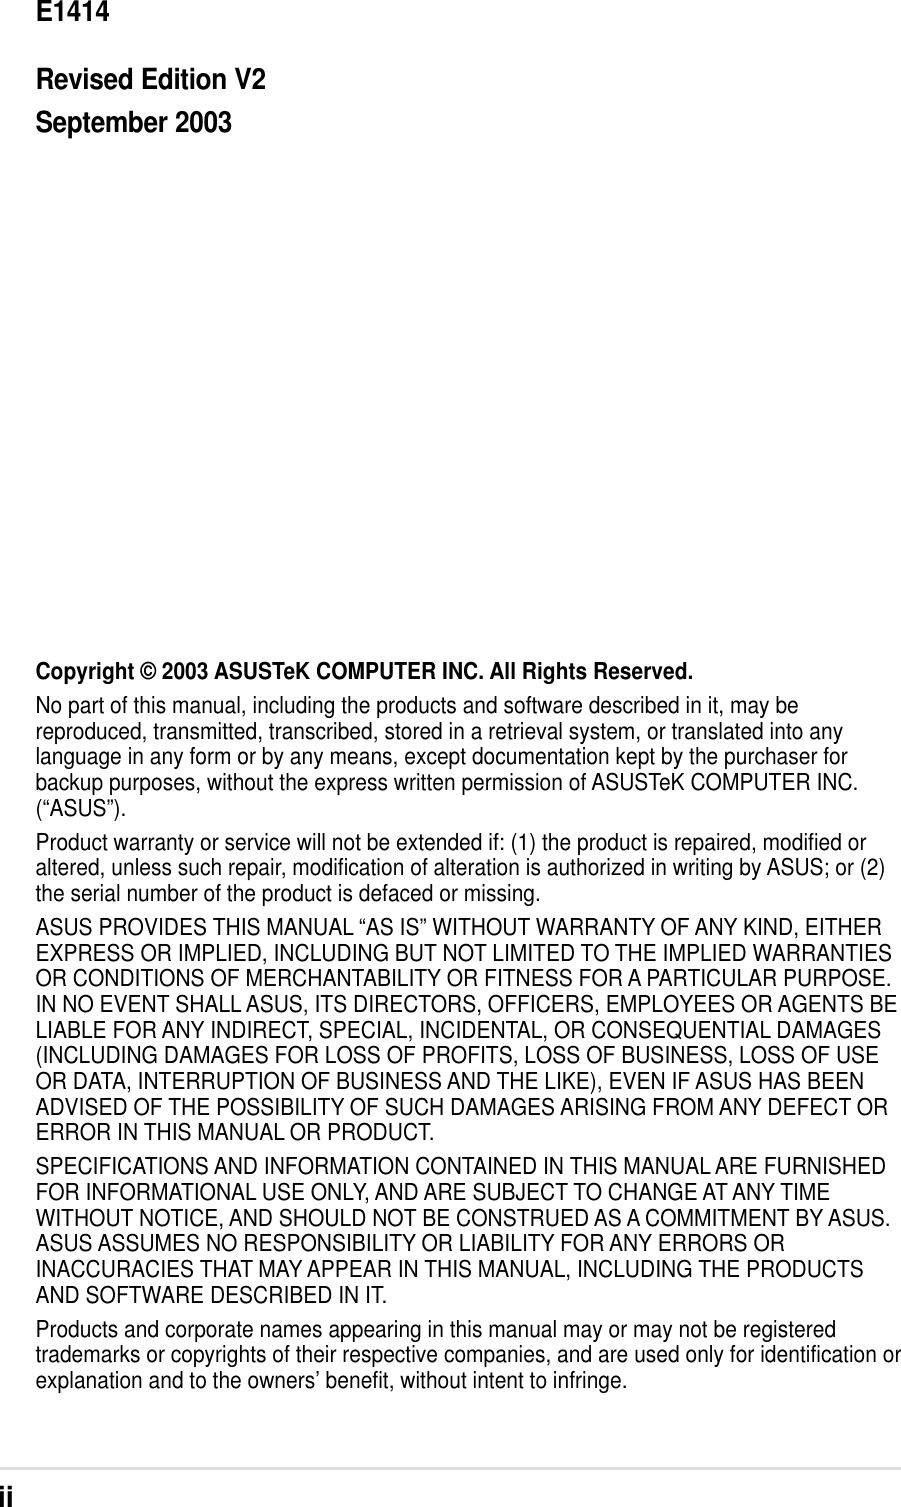 iiChecklistCopyright © 2003 ASUSTeK COMPUTER INC. All Rights Reserved.No part of this manual, including the products and software described in it, may bereproduced, transmitted, transcribed, stored in a retrieval system, or translated into anylanguage in any form or by any means, except documentation kept by the purchaser forbackup purposes, without the express written permission of ASUSTeK COMPUTER INC.(“ASUS”).Product warranty or service will not be extended if: (1) the product is repaired, modified oraltered, unless such repair, modification of alteration is authorized in writing by ASUS; or (2)the serial number of the product is defaced or missing.ASUS PROVIDES THIS MANUAL “AS IS” WITHOUT WARRANTY OF ANY KIND, EITHEREXPRESS OR IMPLIED, INCLUDING BUT NOT LIMITED TO THE IMPLIED WARRANTIESOR CONDITIONS OF MERCHANTABILITY OR FITNESS FOR A PARTICULAR PURPOSE.IN NO EVENT SHALL ASUS, ITS DIRECTORS, OFFICERS, EMPLOYEES OR AGENTS BELIABLE FOR ANY INDIRECT, SPECIAL, INCIDENTAL, OR CONSEQUENTIAL DAMAGES(INCLUDING DAMAGES FOR LOSS OF PROFITS, LOSS OF BUSINESS, LOSS OF USEOR DATA, INTERRUPTION OF BUSINESS AND THE LIKE), EVEN IF ASUS HAS BEENADVISED OF THE POSSIBILITY OF SUCH DAMAGES ARISING FROM ANY DEFECT ORERROR IN THIS MANUAL OR PRODUCT.SPECIFICATIONS AND INFORMATION CONTAINED IN THIS MANUAL ARE FURNISHEDFOR INFORMATIONAL USE ONLY, AND ARE SUBJECT TO CHANGE AT ANY TIMEWITHOUT NOTICE, AND SHOULD NOT BE CONSTRUED AS A COMMITMENT BY ASUS.ASUS ASSUMES NO RESPONSIBILITY OR LIABILITY FOR ANY ERRORS ORINACCURACIES THAT MAY APPEAR IN THIS MANUAL, INCLUDING THE PRODUCTSAND SOFTWARE DESCRIBED IN IT.Products and corporate names appearing in this manual may or may not be registeredtrademarks or copyrights of their respective companies, and are used only for identification orexplanation and to the owners’ benefit, without intent to infringe.E1414Revised Edition V2September 2003